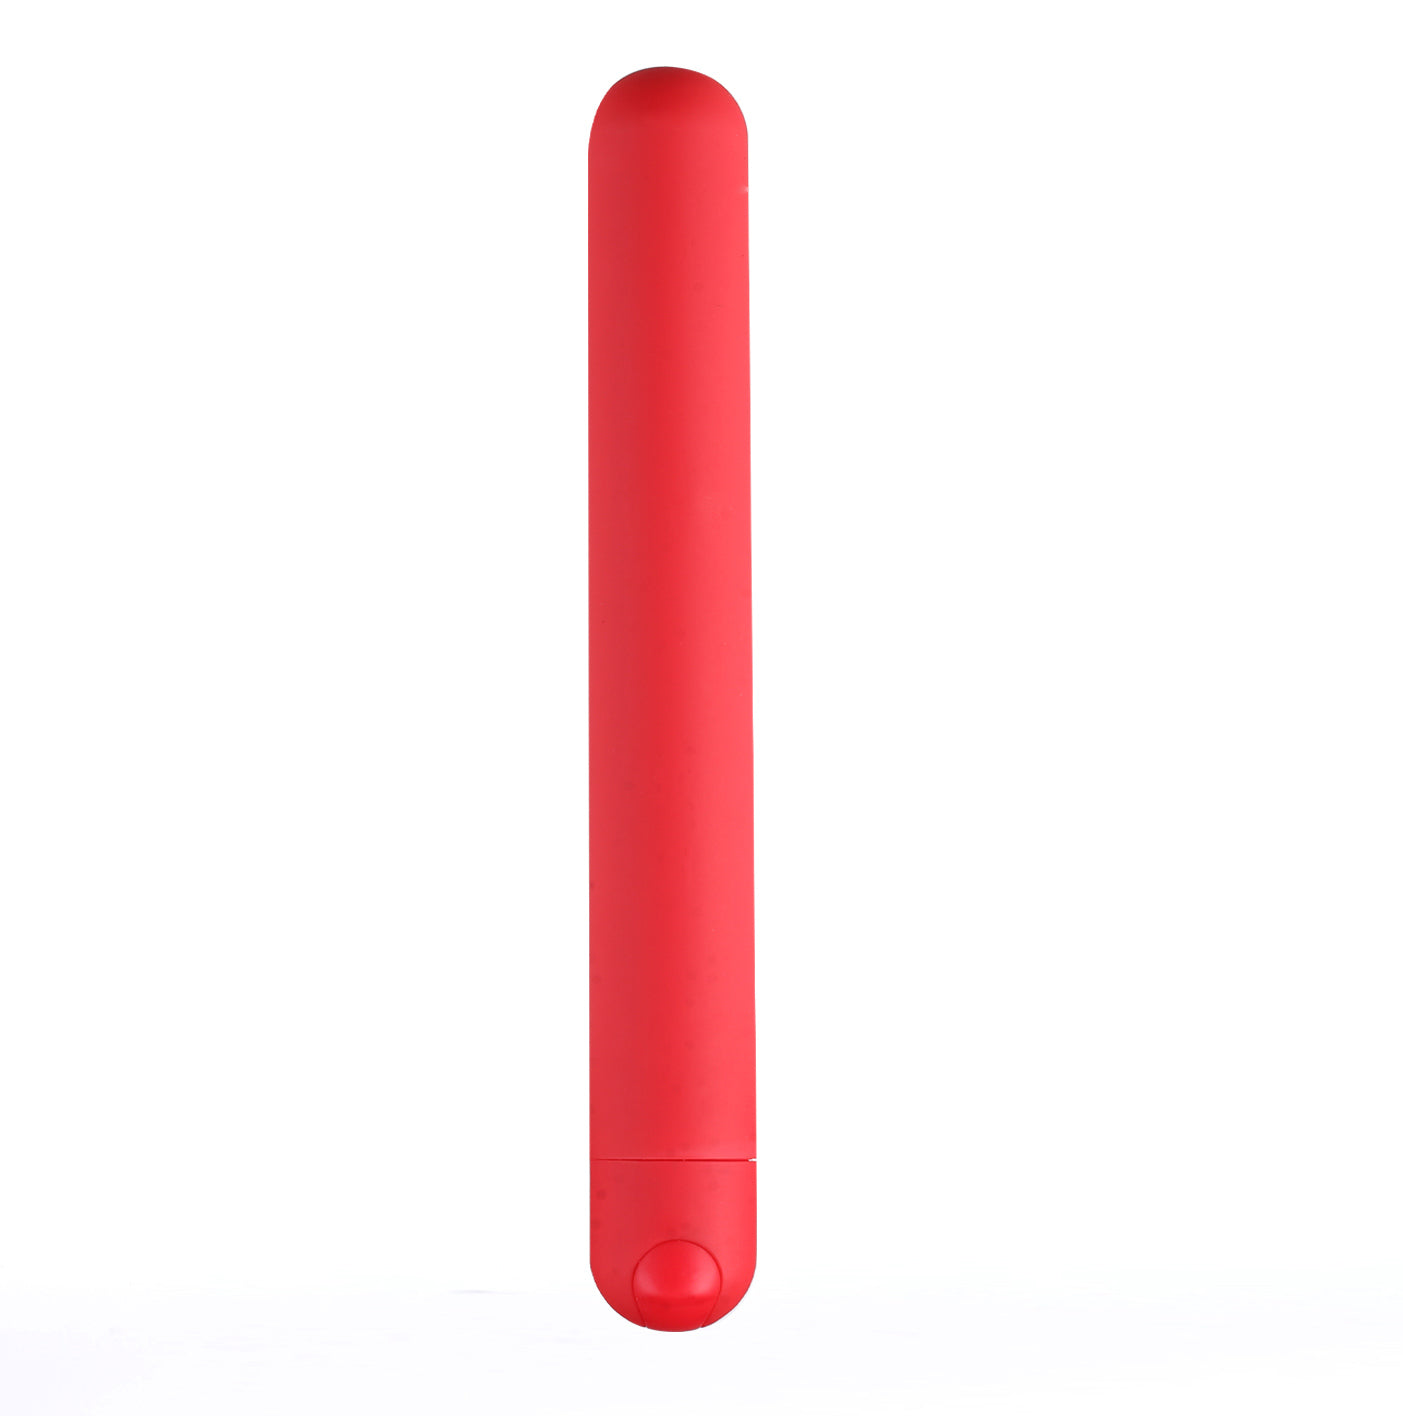 Abbie X-Long Super Charged Bullet - Red-4